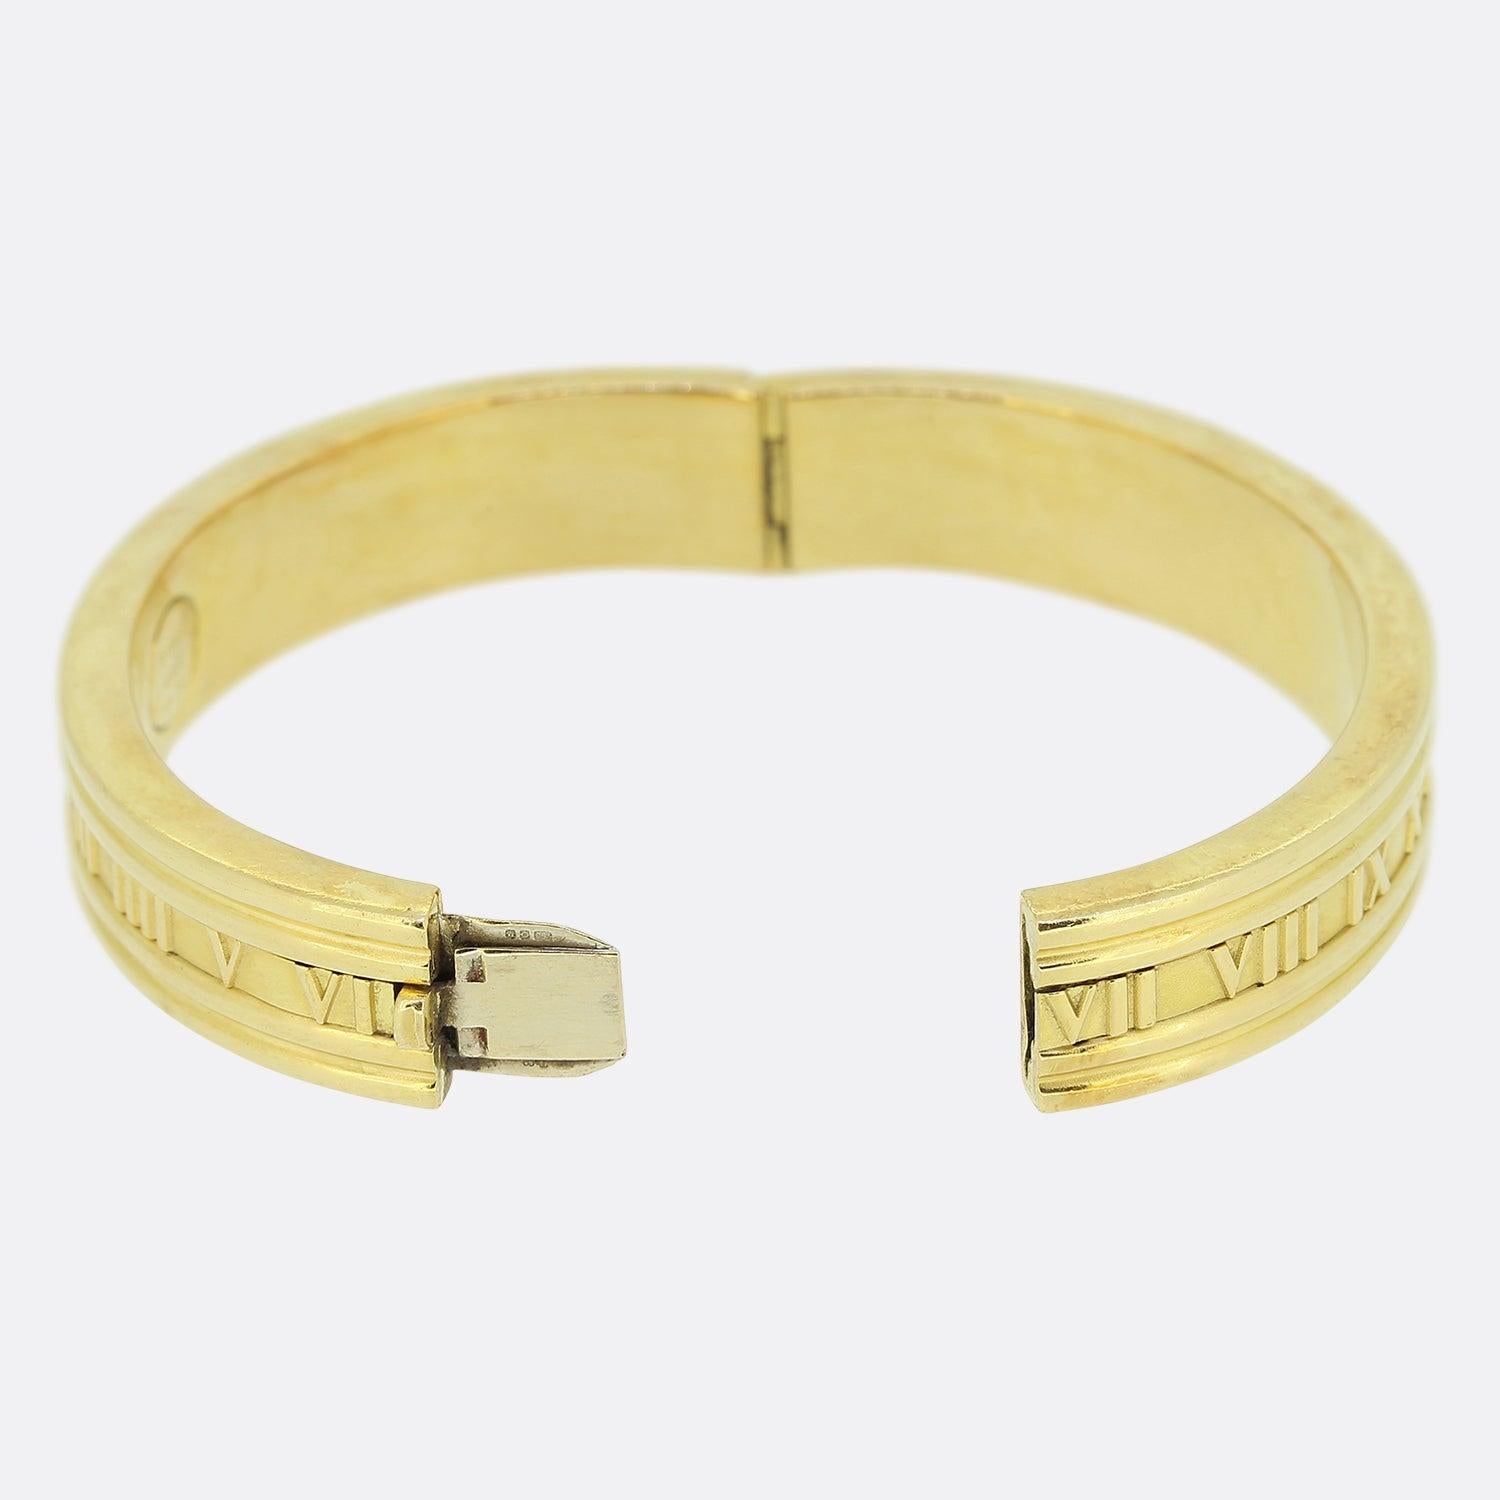 Here we have an 18ct yellow gold bangle from the luxury jewellery designer Tiffany & Co. The bangle forms part of the atlas collection and features the iconic Roman numeral design around the bracelet. 

Condition: Used (Excellent)
Weight: 44.5